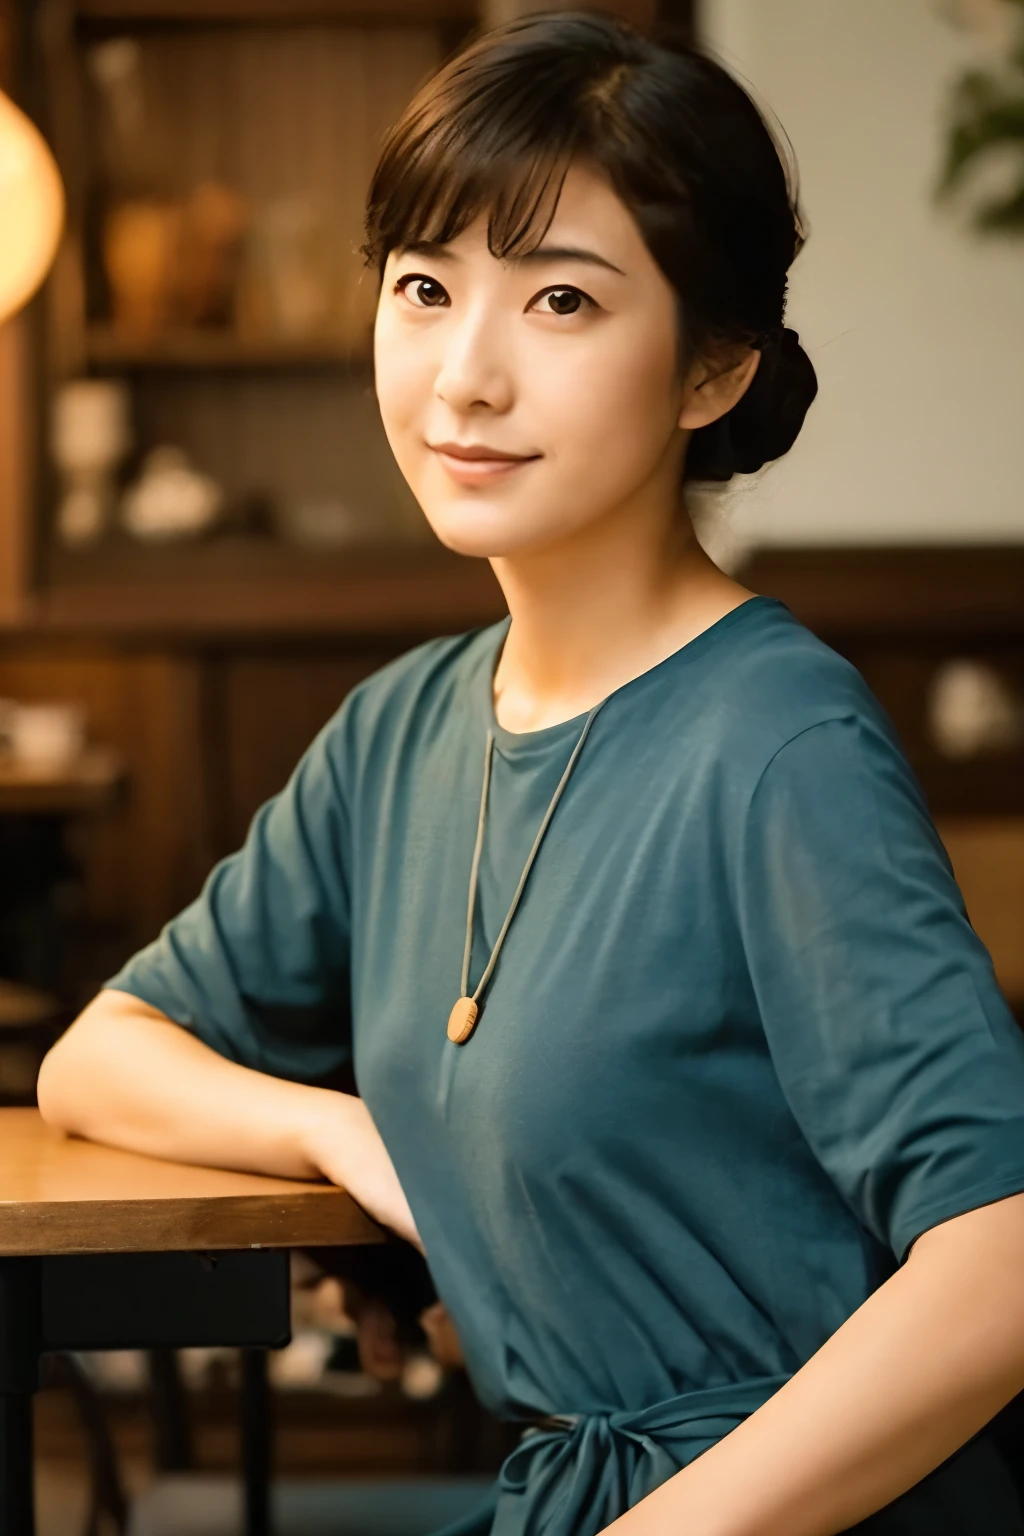 Create a high-quality, realistic portrait of a 30s Japanese woman sitting in a cozy, wooden-themed café. She has straight, dark brown hair with bangs, tied back in a low ponytail. Her expression is friendly and engaging. She is wearing a simple, short-sleeved, dark green-blue dress. The background features wooden paneling and a warm, ambient light from a lamp in the corner. Photo must be a masterpiece in quality expressing correct human structure, detailed face, and detailed eyes.